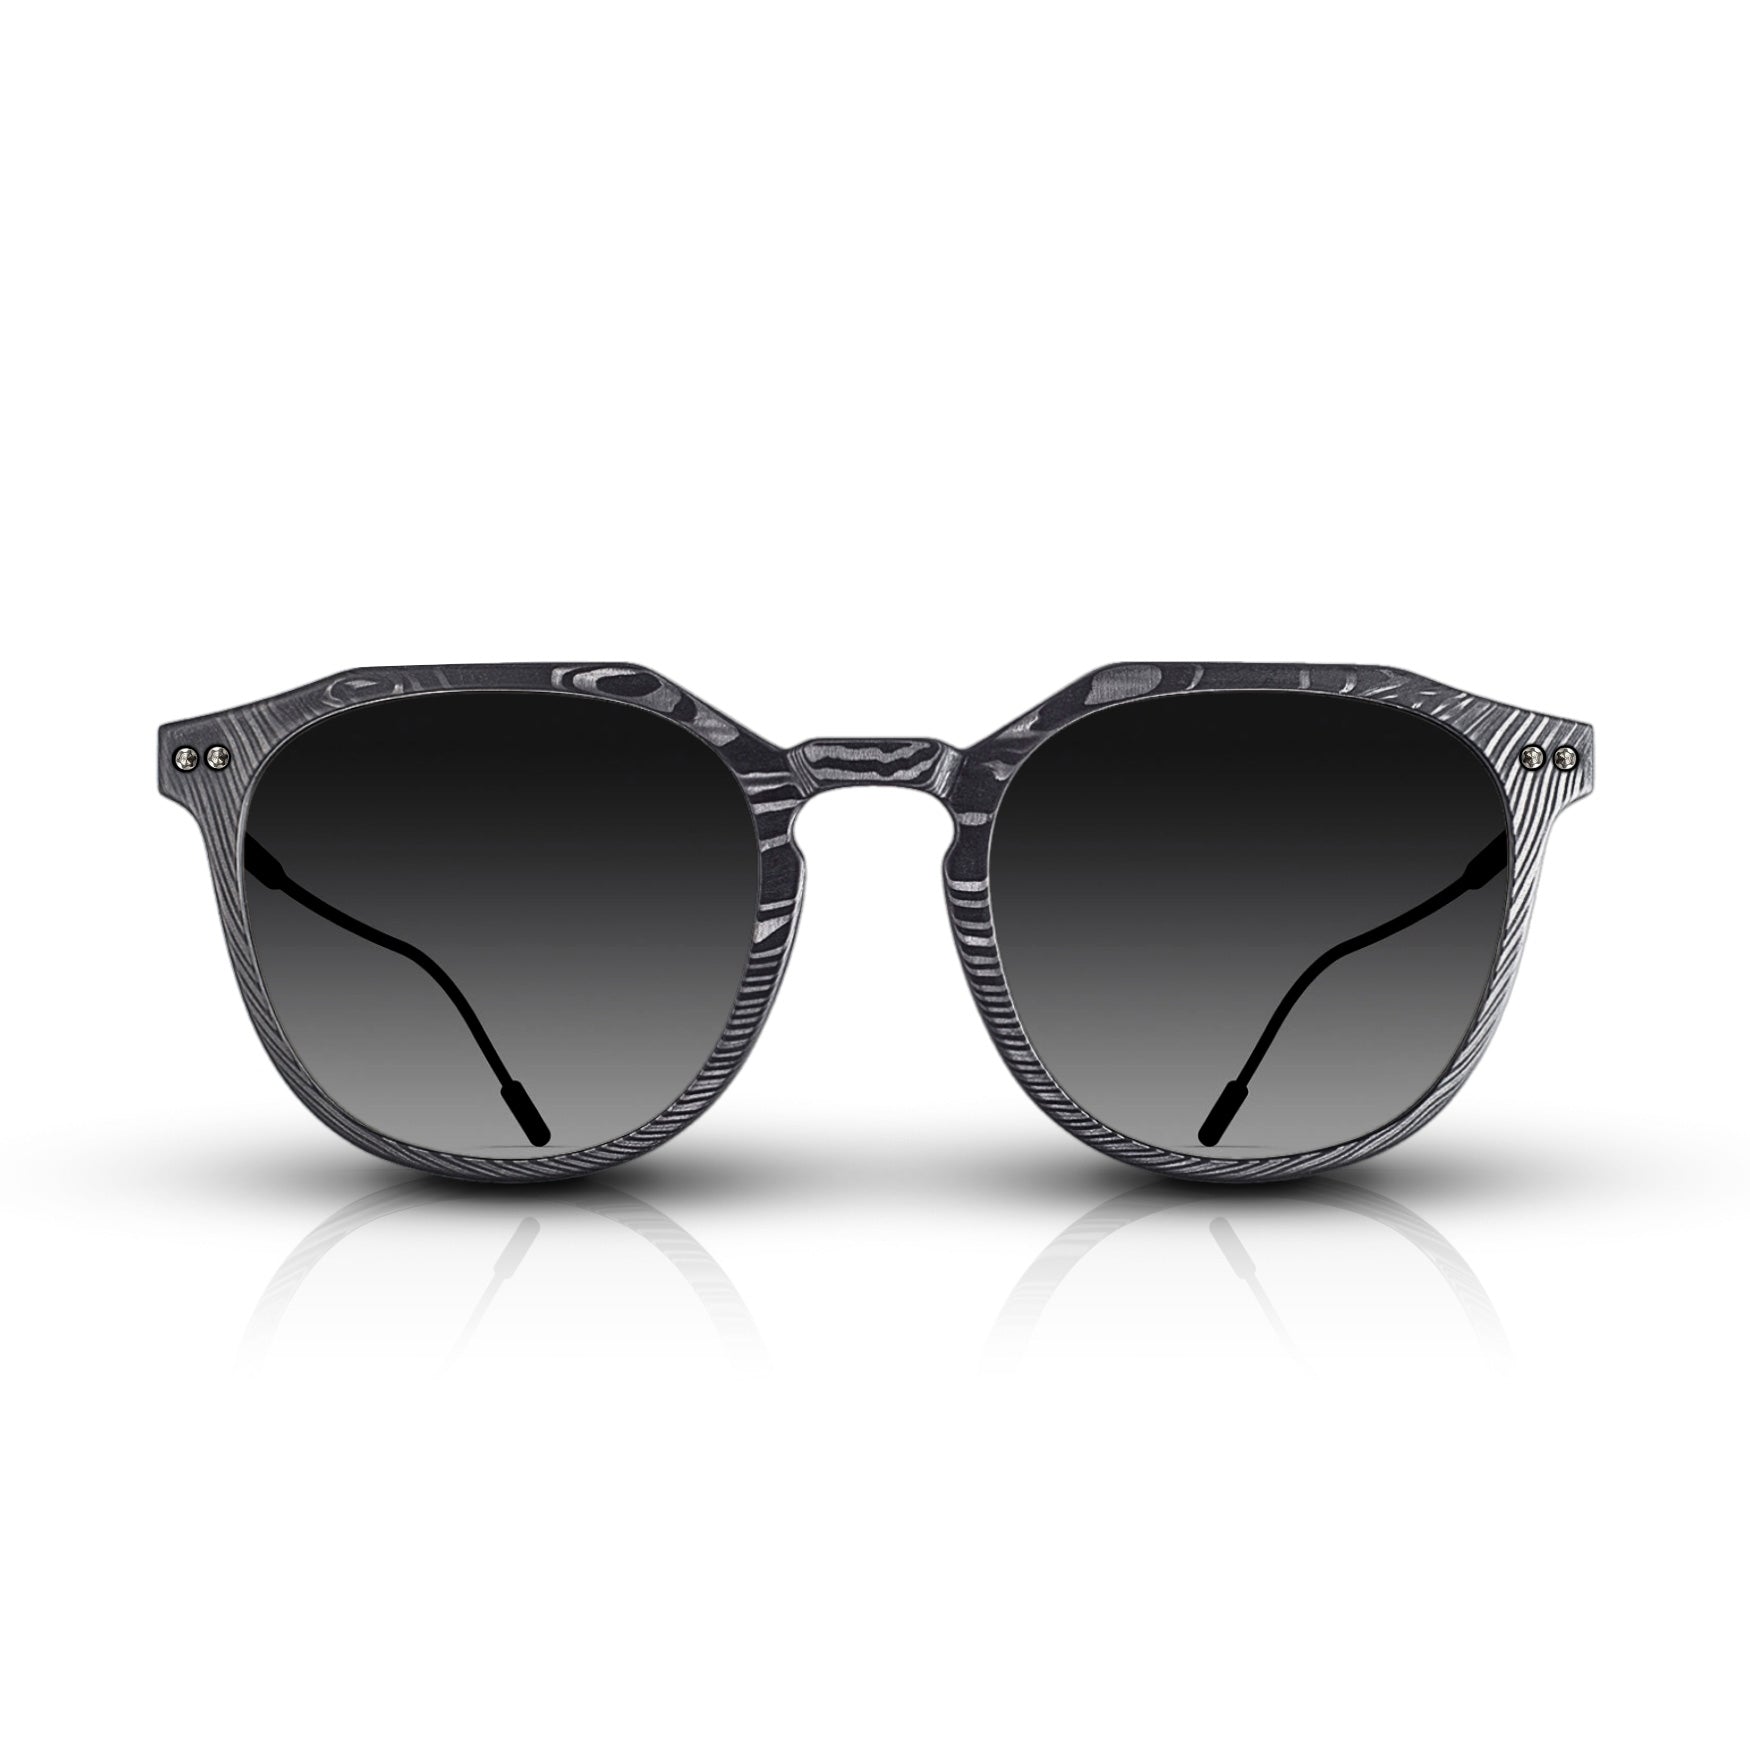 Front of the latest Roveri Eyewear CLM7 Black On Black Collection, pantos inspired sunglasses for men in UDCT® Machined Carbon Fiber, with dark gray gradient lenses and black PVD Beta-Titanium frame, handmade in Italy.